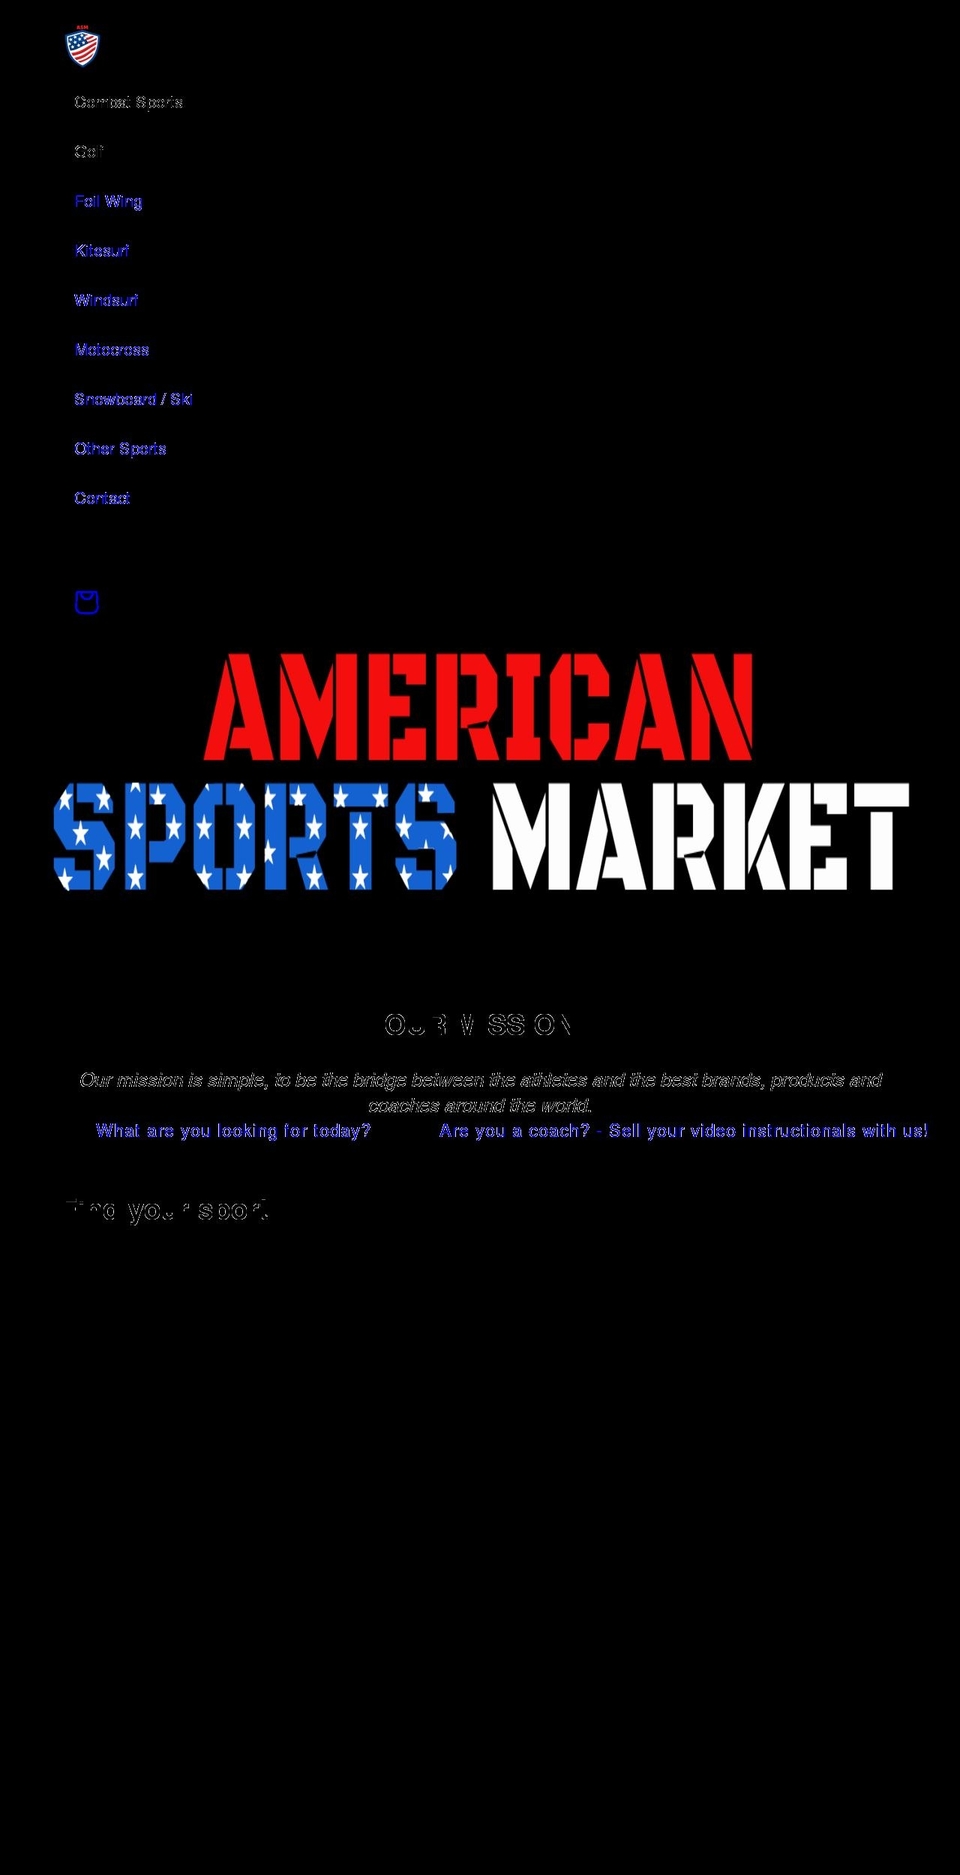 Sports Shopify theme site example americansportsmarket.com